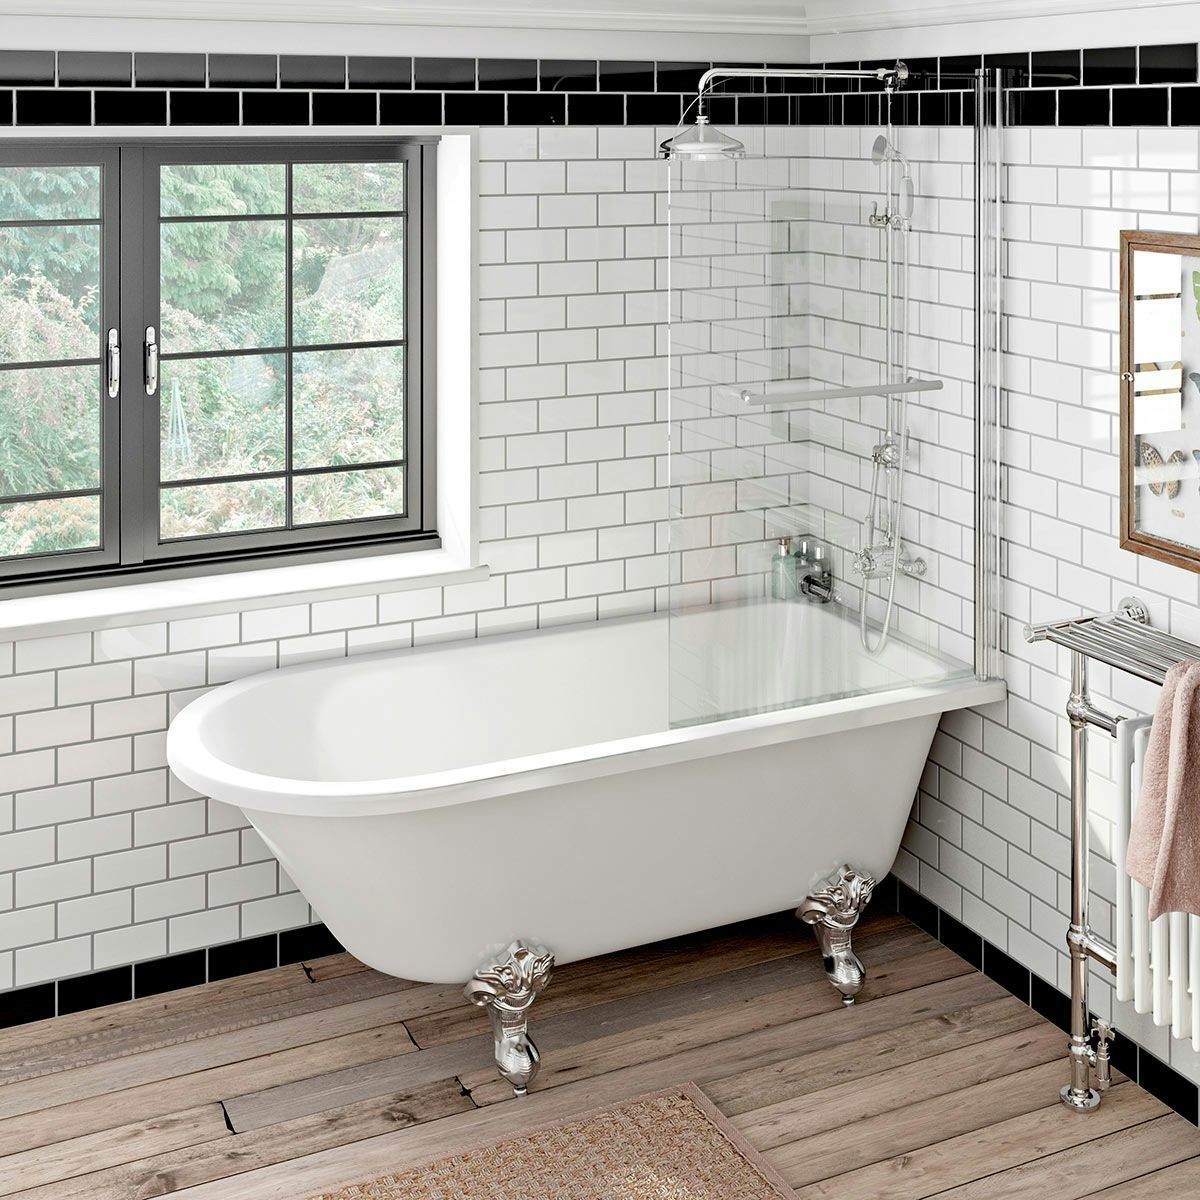 Orchard Dulwich traditional freestanding shower bath with 6mm shower screen and rail 1710 x 780